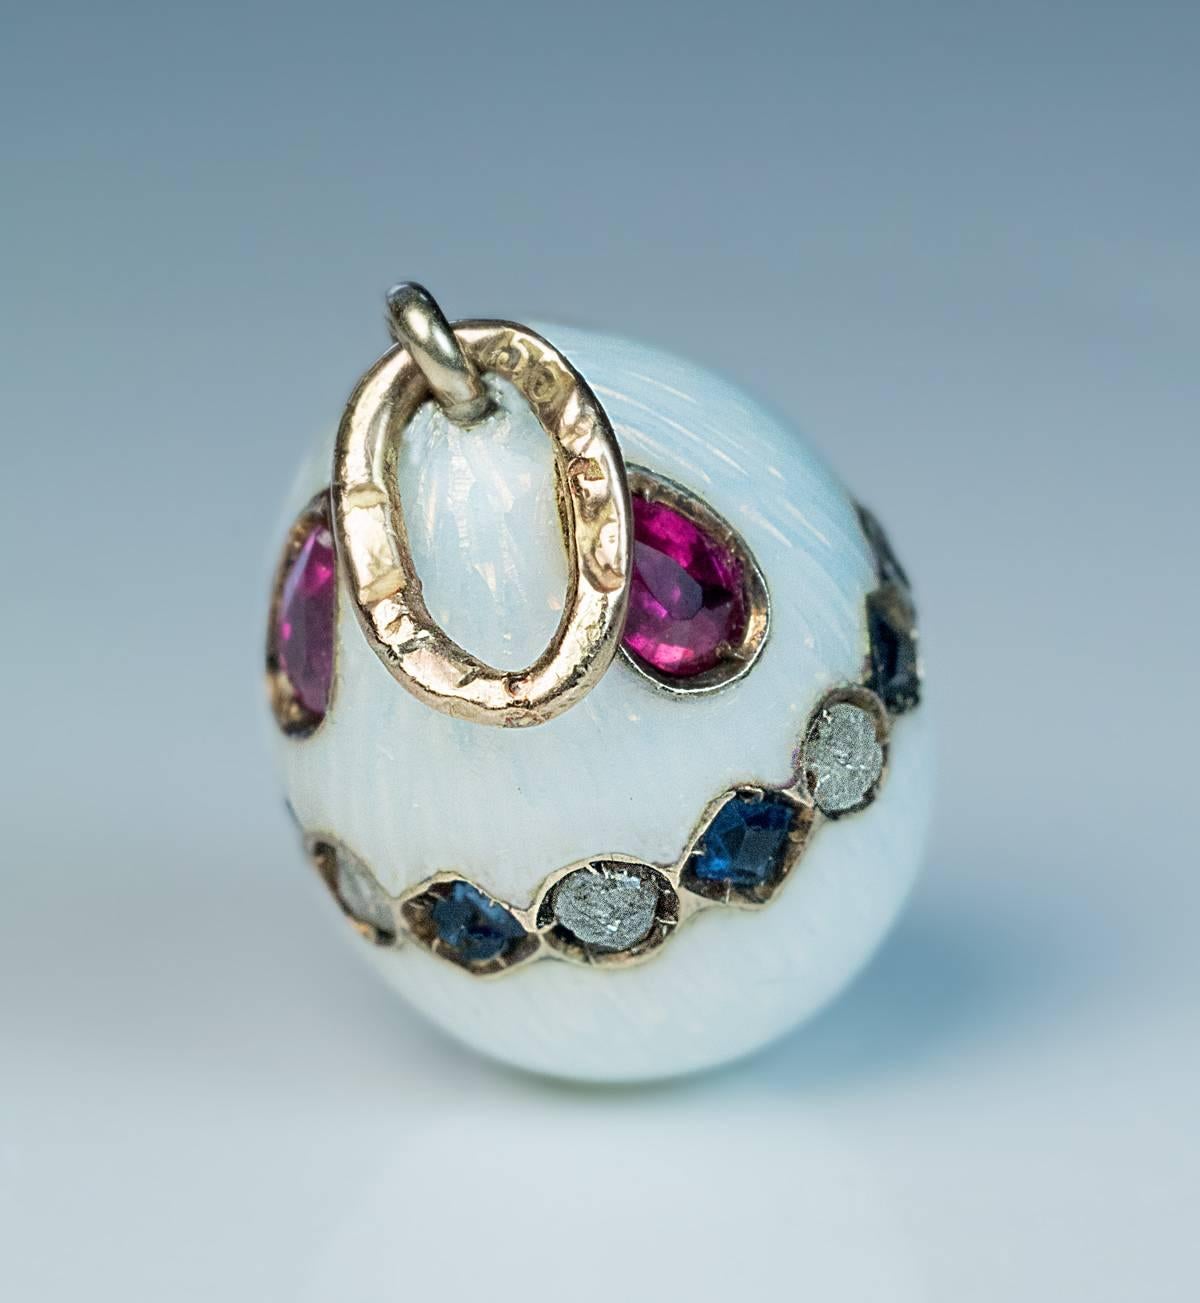 made between 1908 and 1917

The egg is covered with a white guilloche enamel and embellished with a band of step cut sapphires & rose cut diamonds, and three drop shaped rubies.
Marked on the gold suspension ring with 56 zolotnik (14K) old